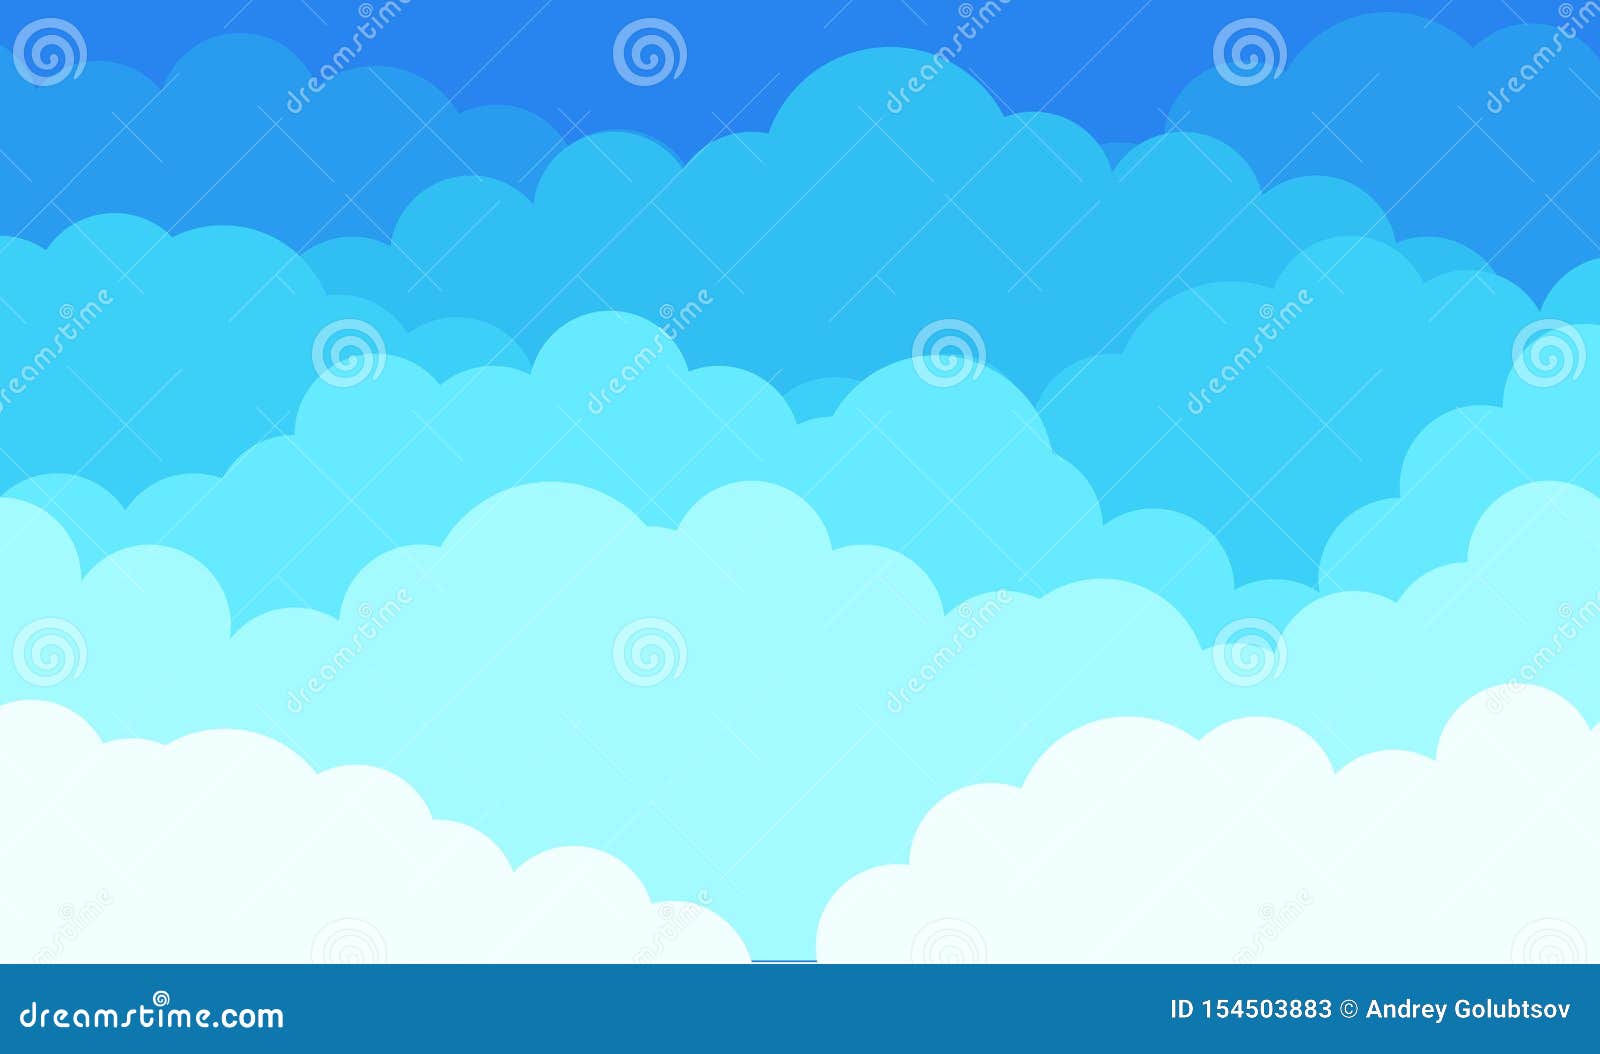 cloud background, cartoon blue sky with white clouds pattern.  abstract flat graphic  background